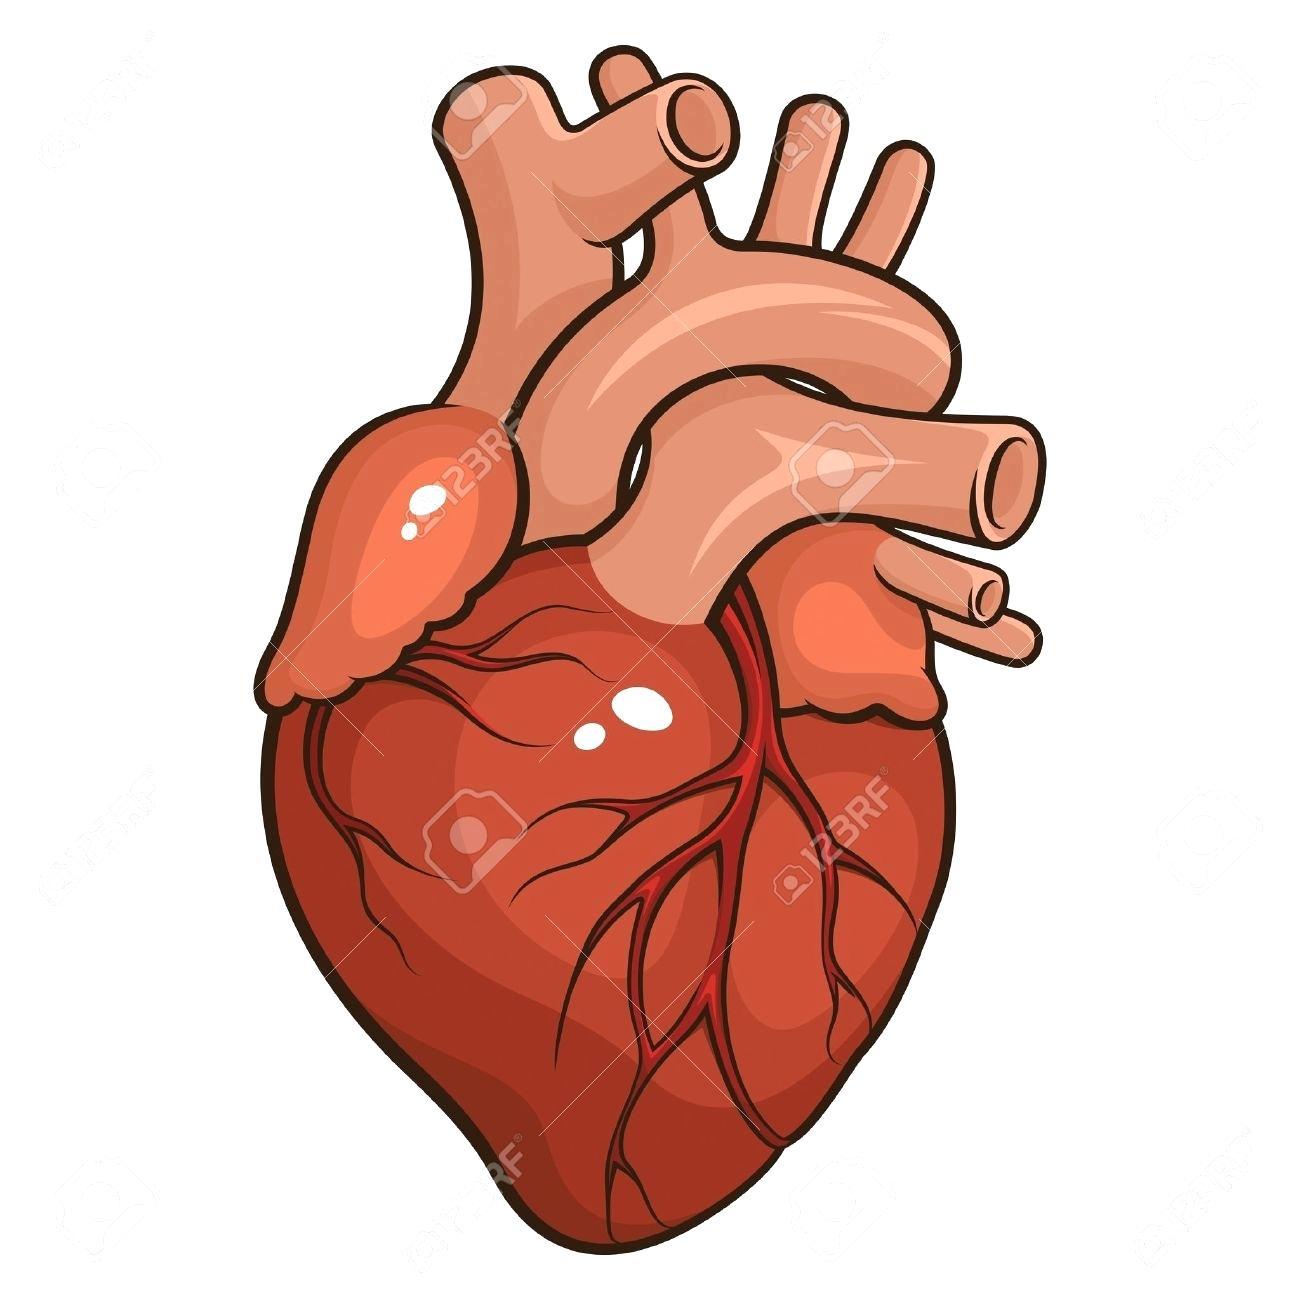 Simple How To Draw A Human Heart Sketch 